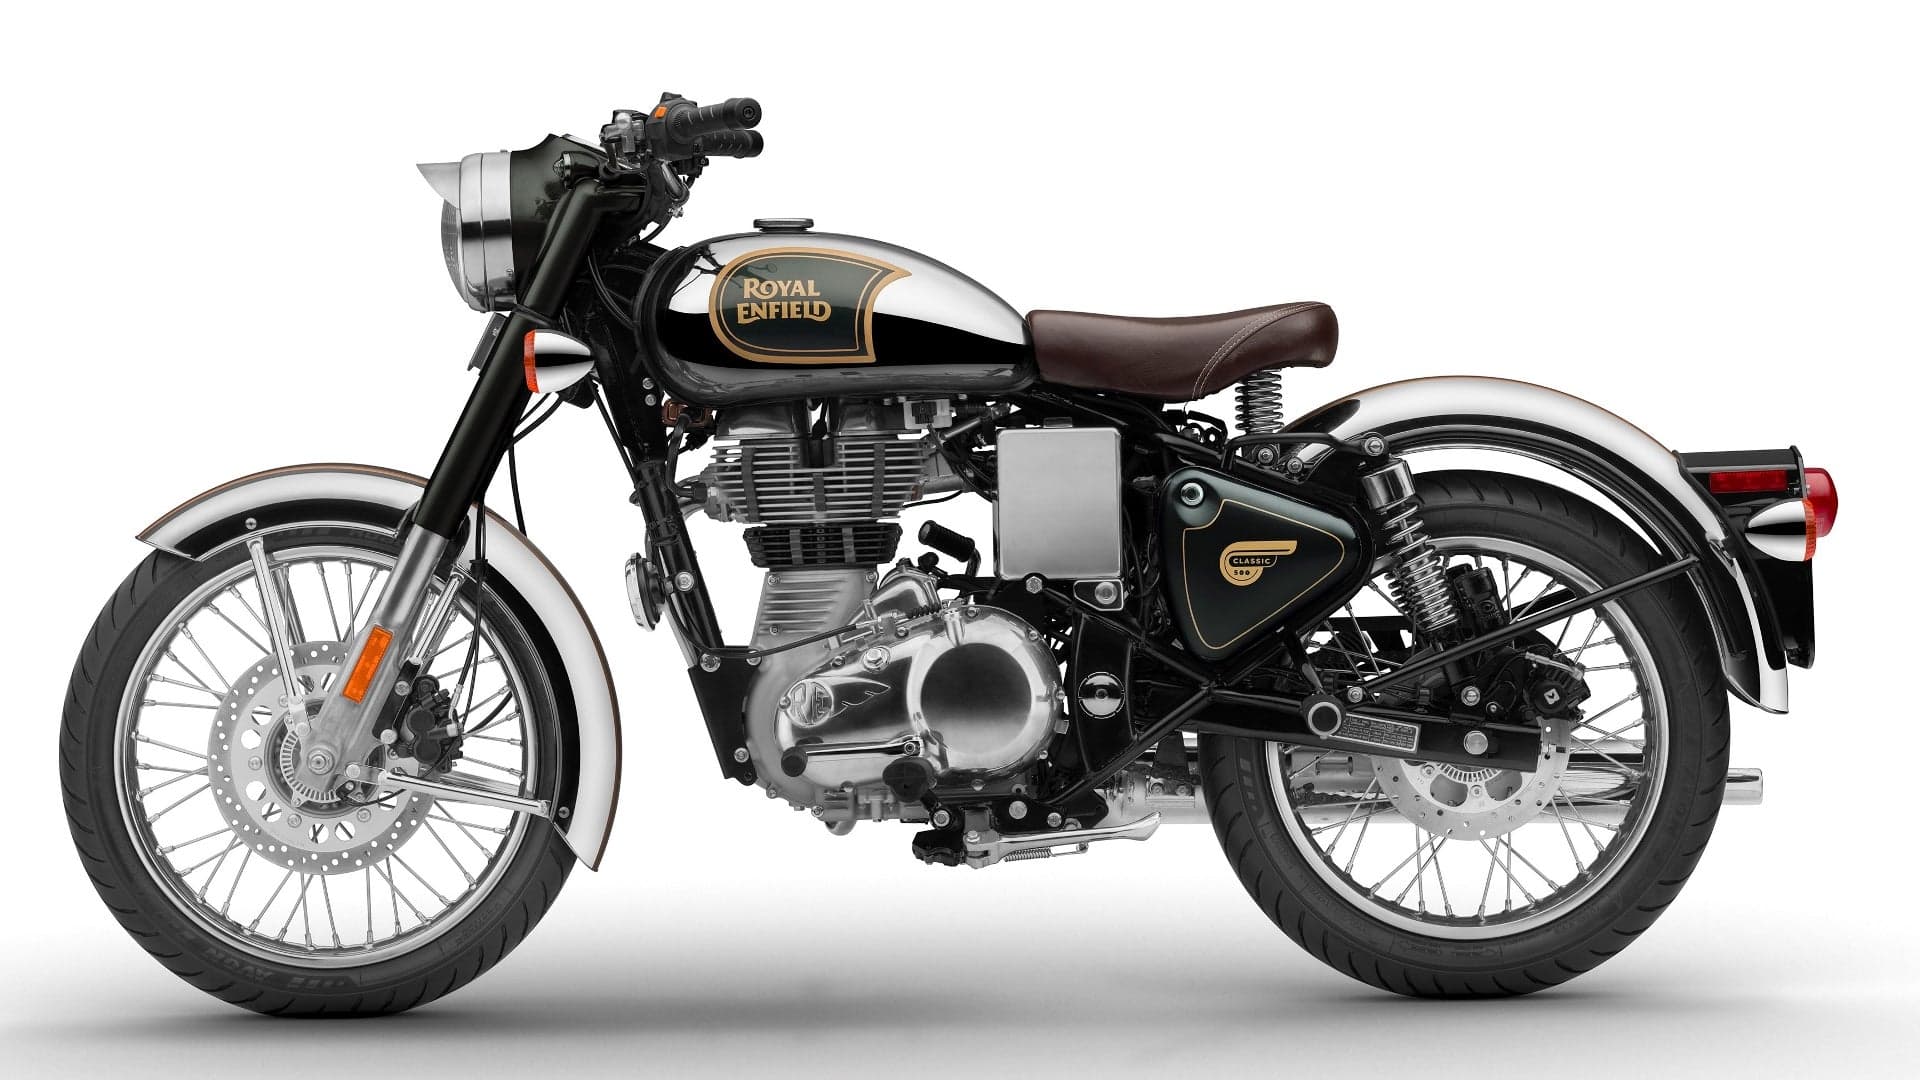 2018 Royal Enfield Classic 500: Mechanical, Visual Upgrades Keep the Classic Modern